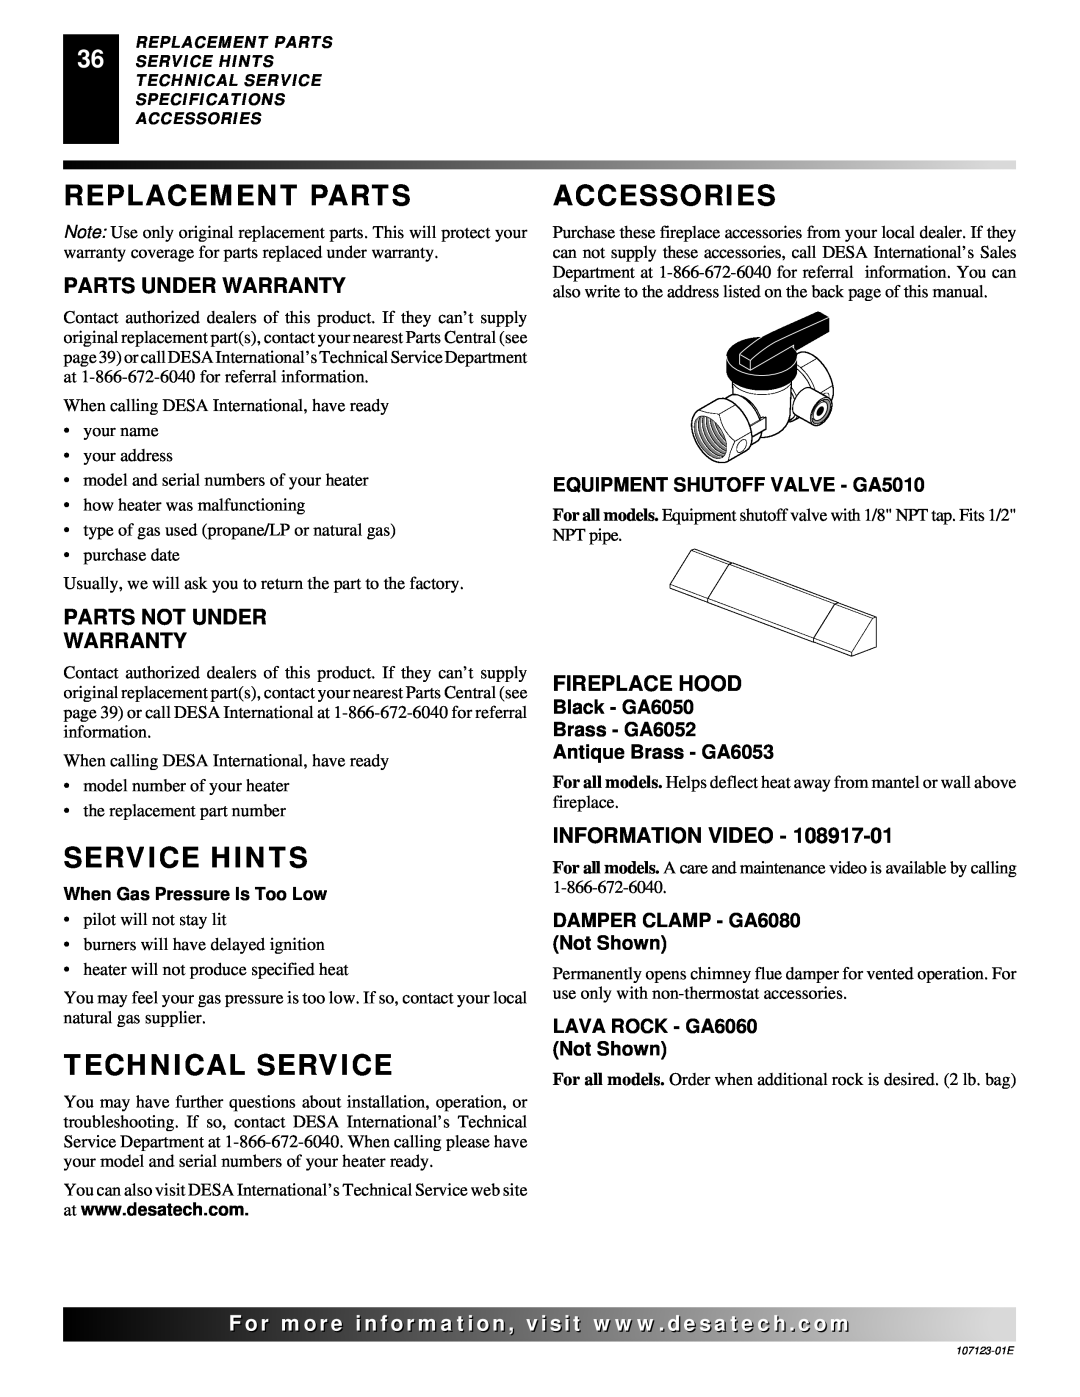 Desa CRL2718N Replacement Parts, Service Hints, Technical Service, Accessories, Parts Under Warranty, Fireplace Hood 